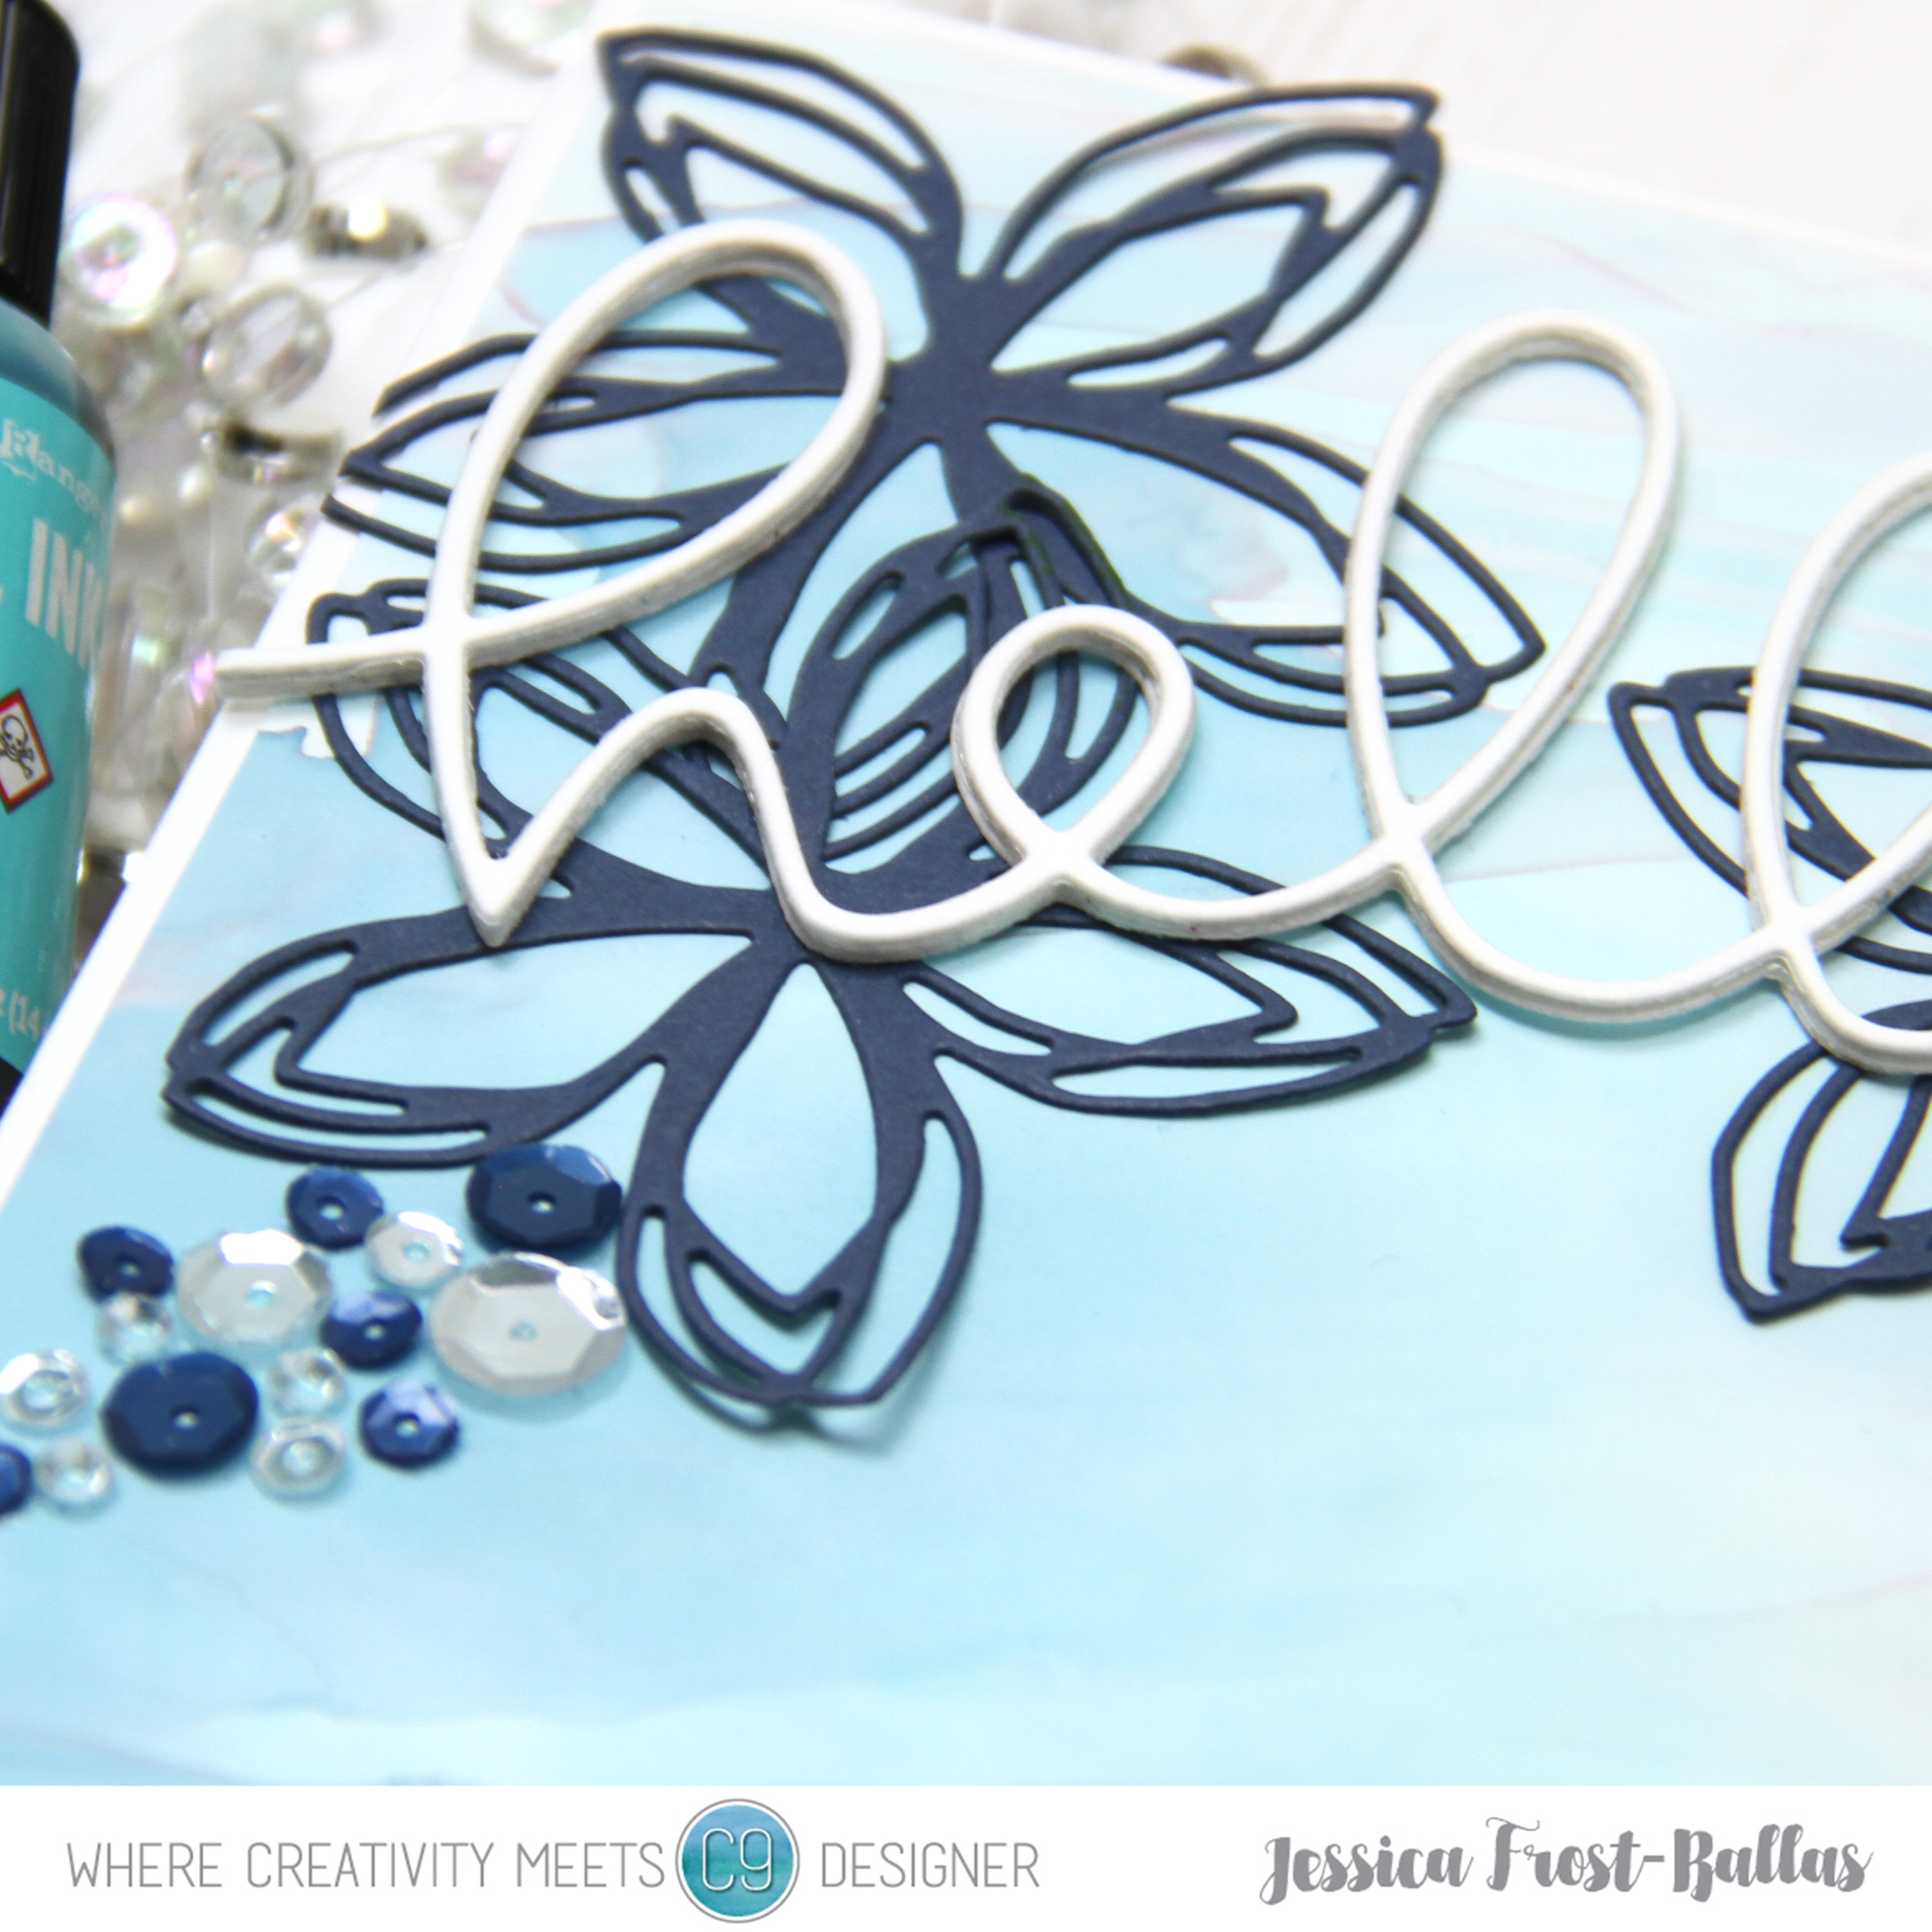 Hello by Jessica Frost-Ballas for Where Creativity Meets C9